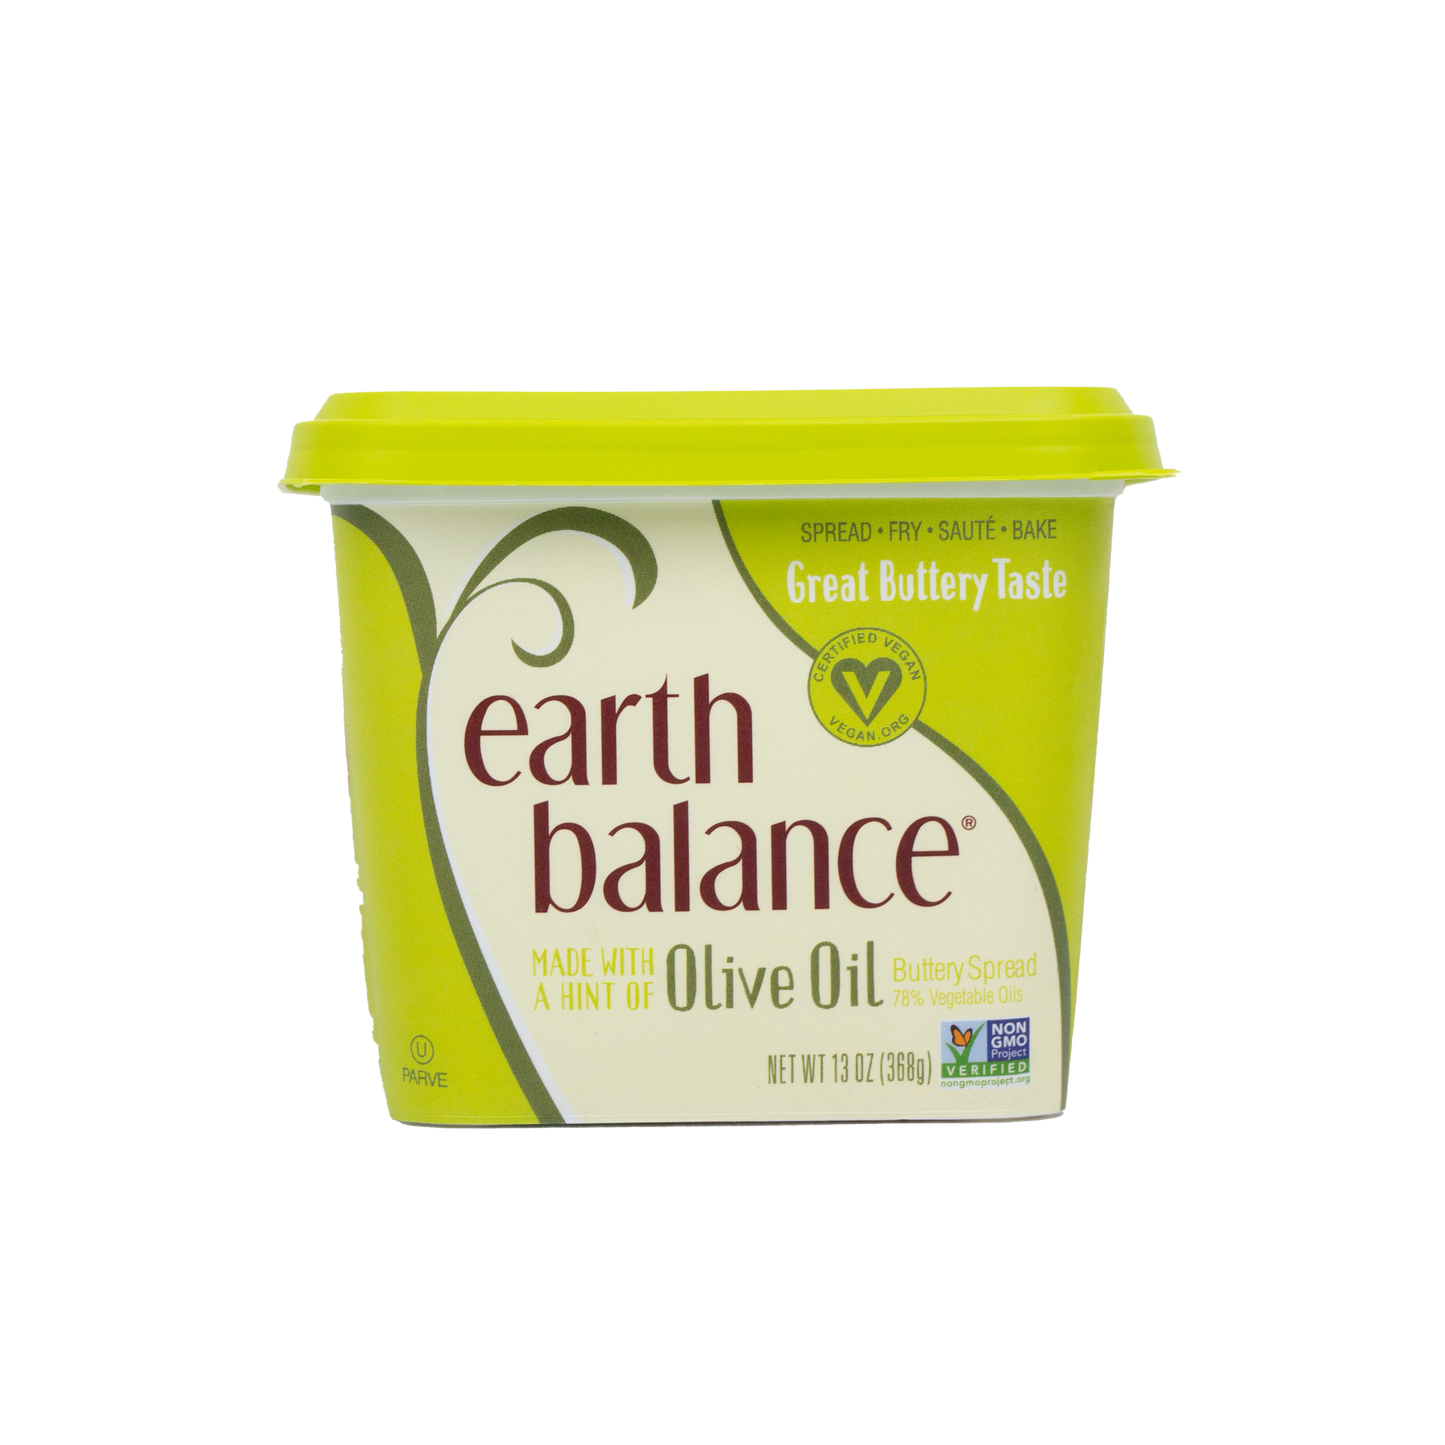 Earth Balance - Olive Oil - Butter Spread (Store Pick - Up Only)